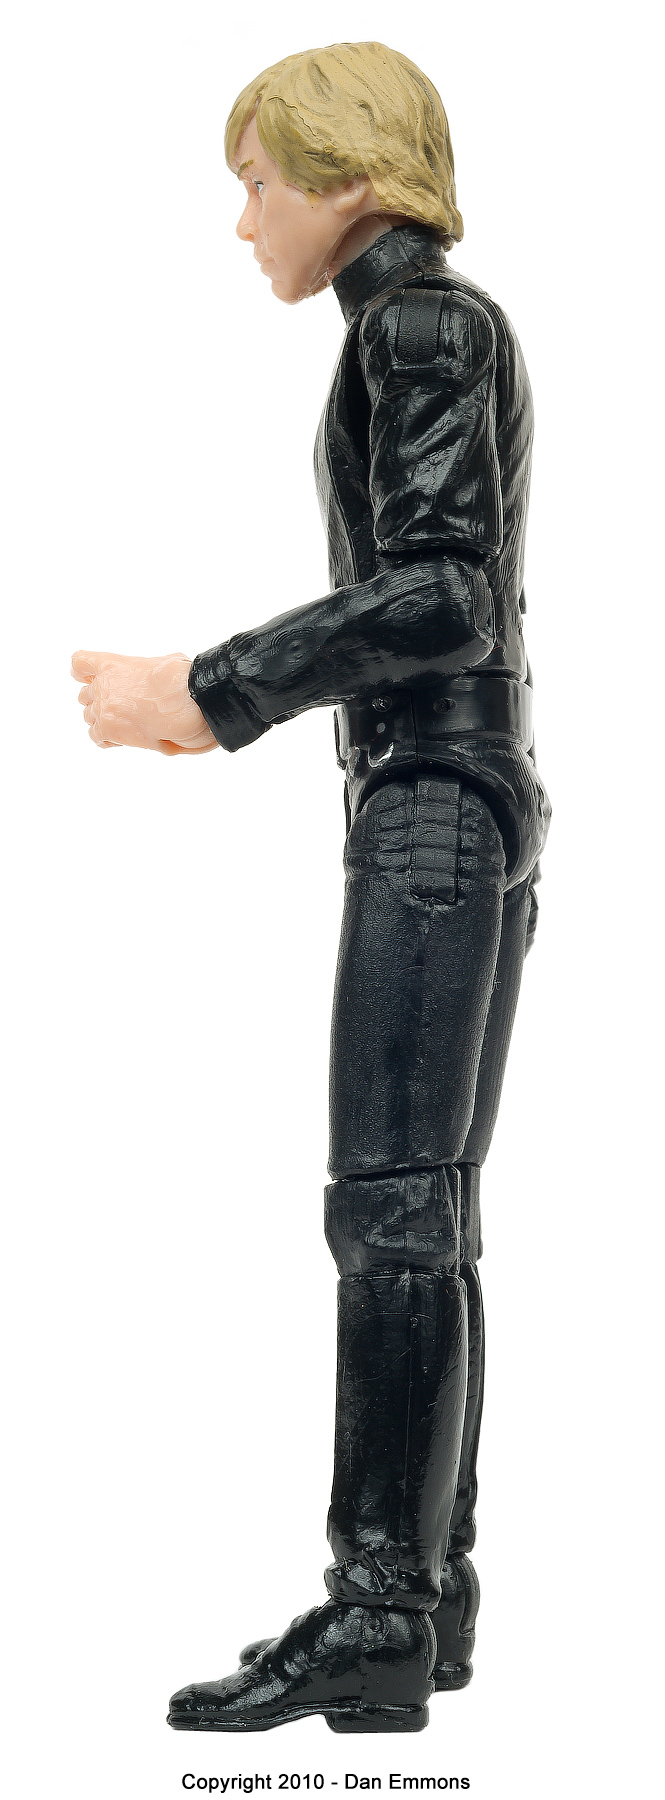 The Vintage Collection - VC23: Luke Skywalker (Jedi Knight Outfit)